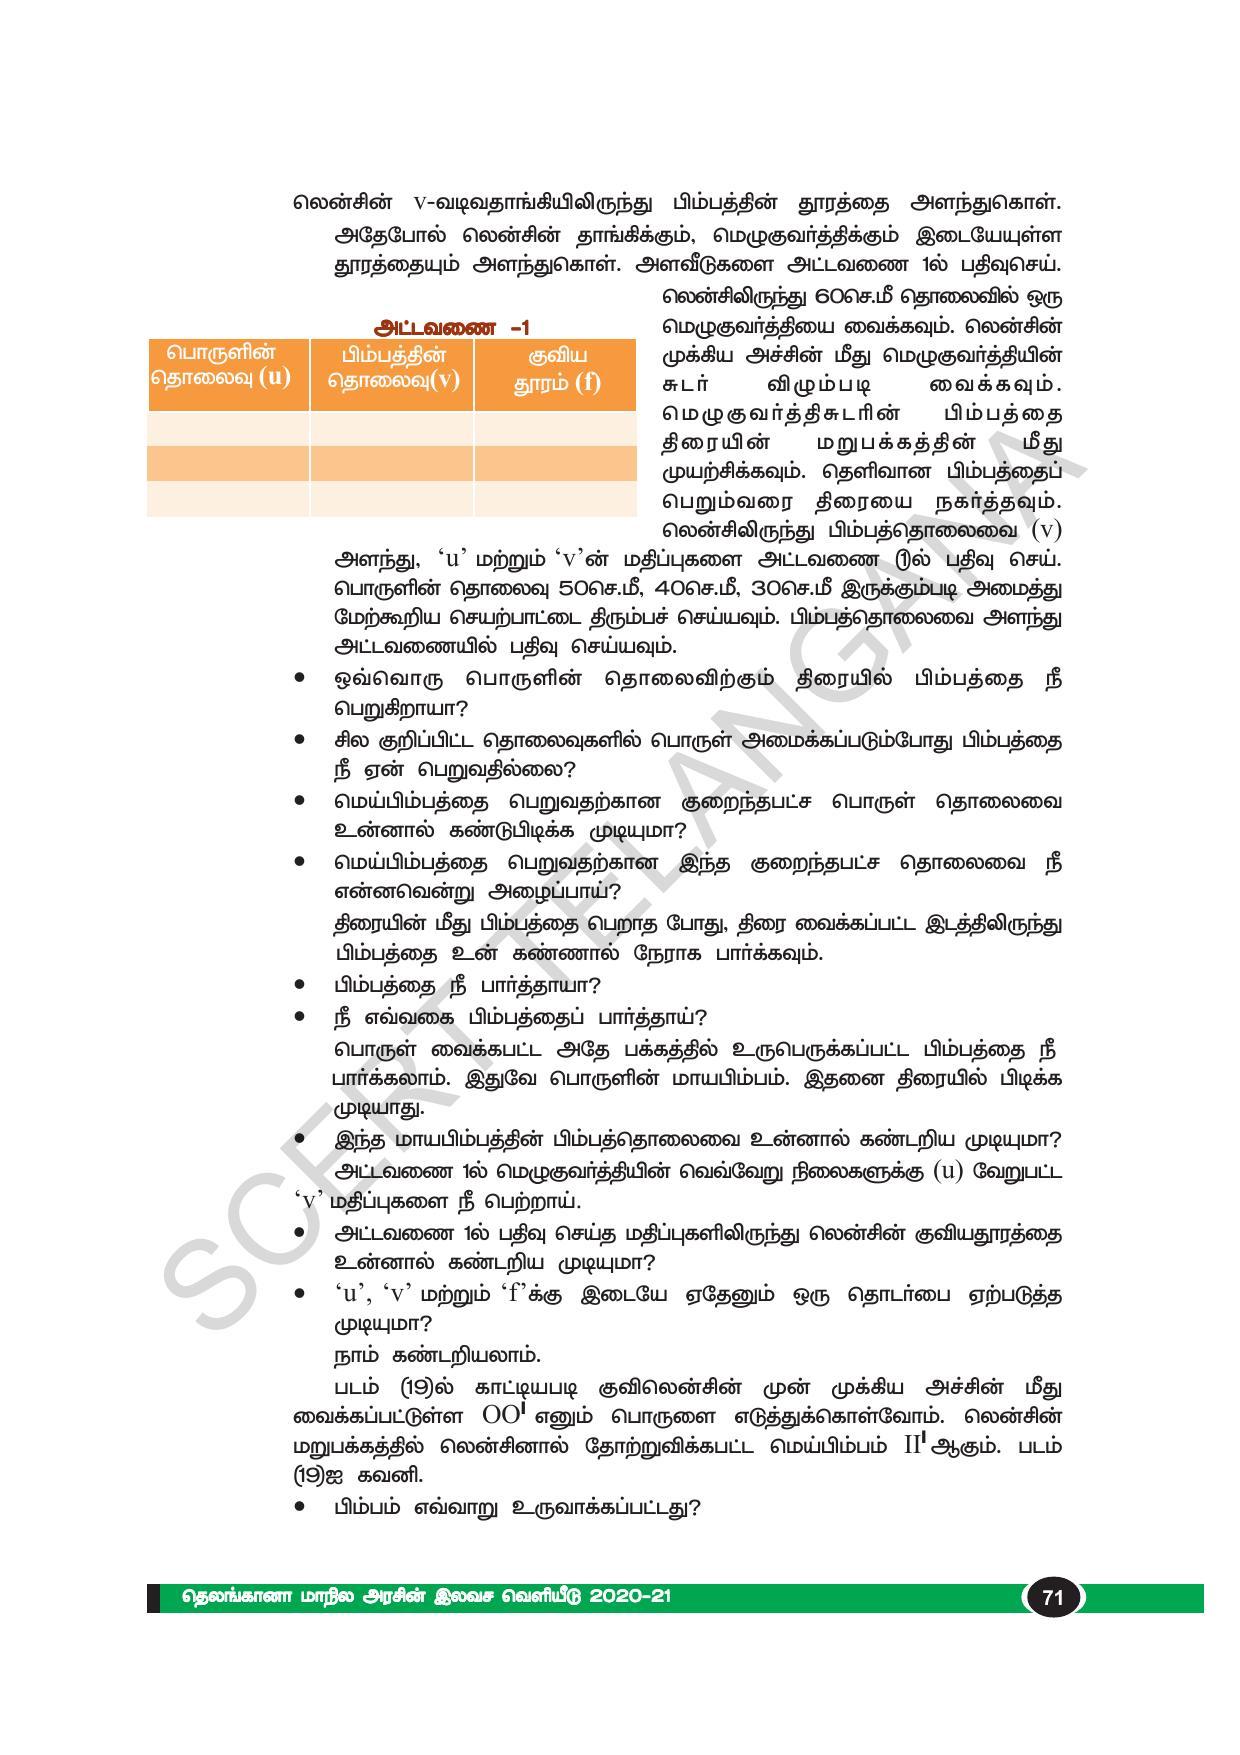 TS SCERT Class 10 Physical Science(Tamil Medium) Text Book - Page 83